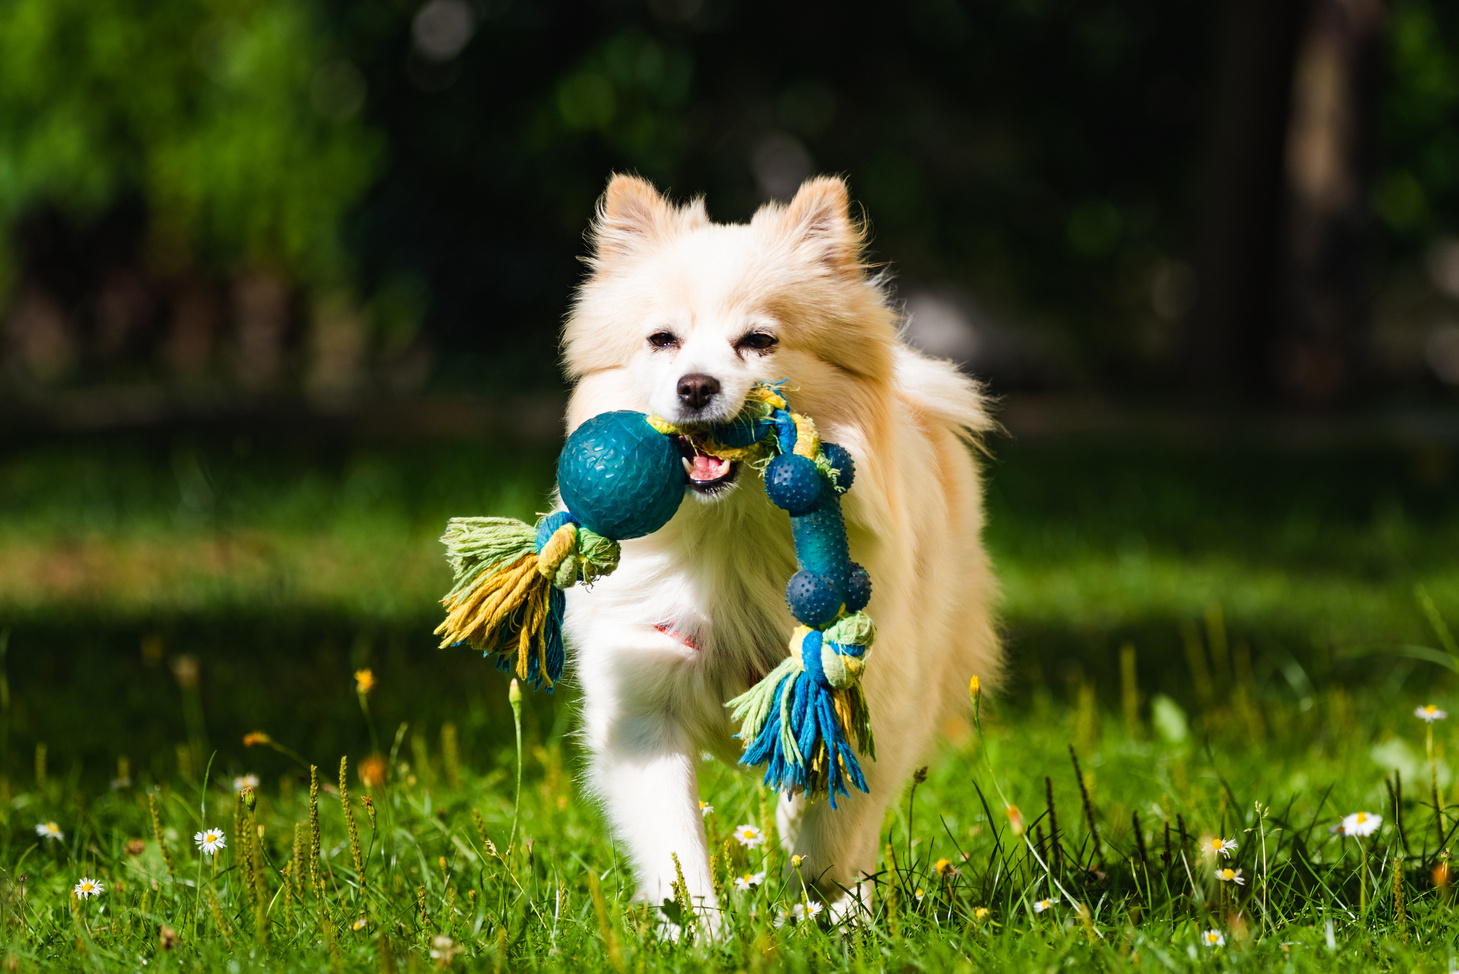 Pet Dog Fetching Toy Outdoors